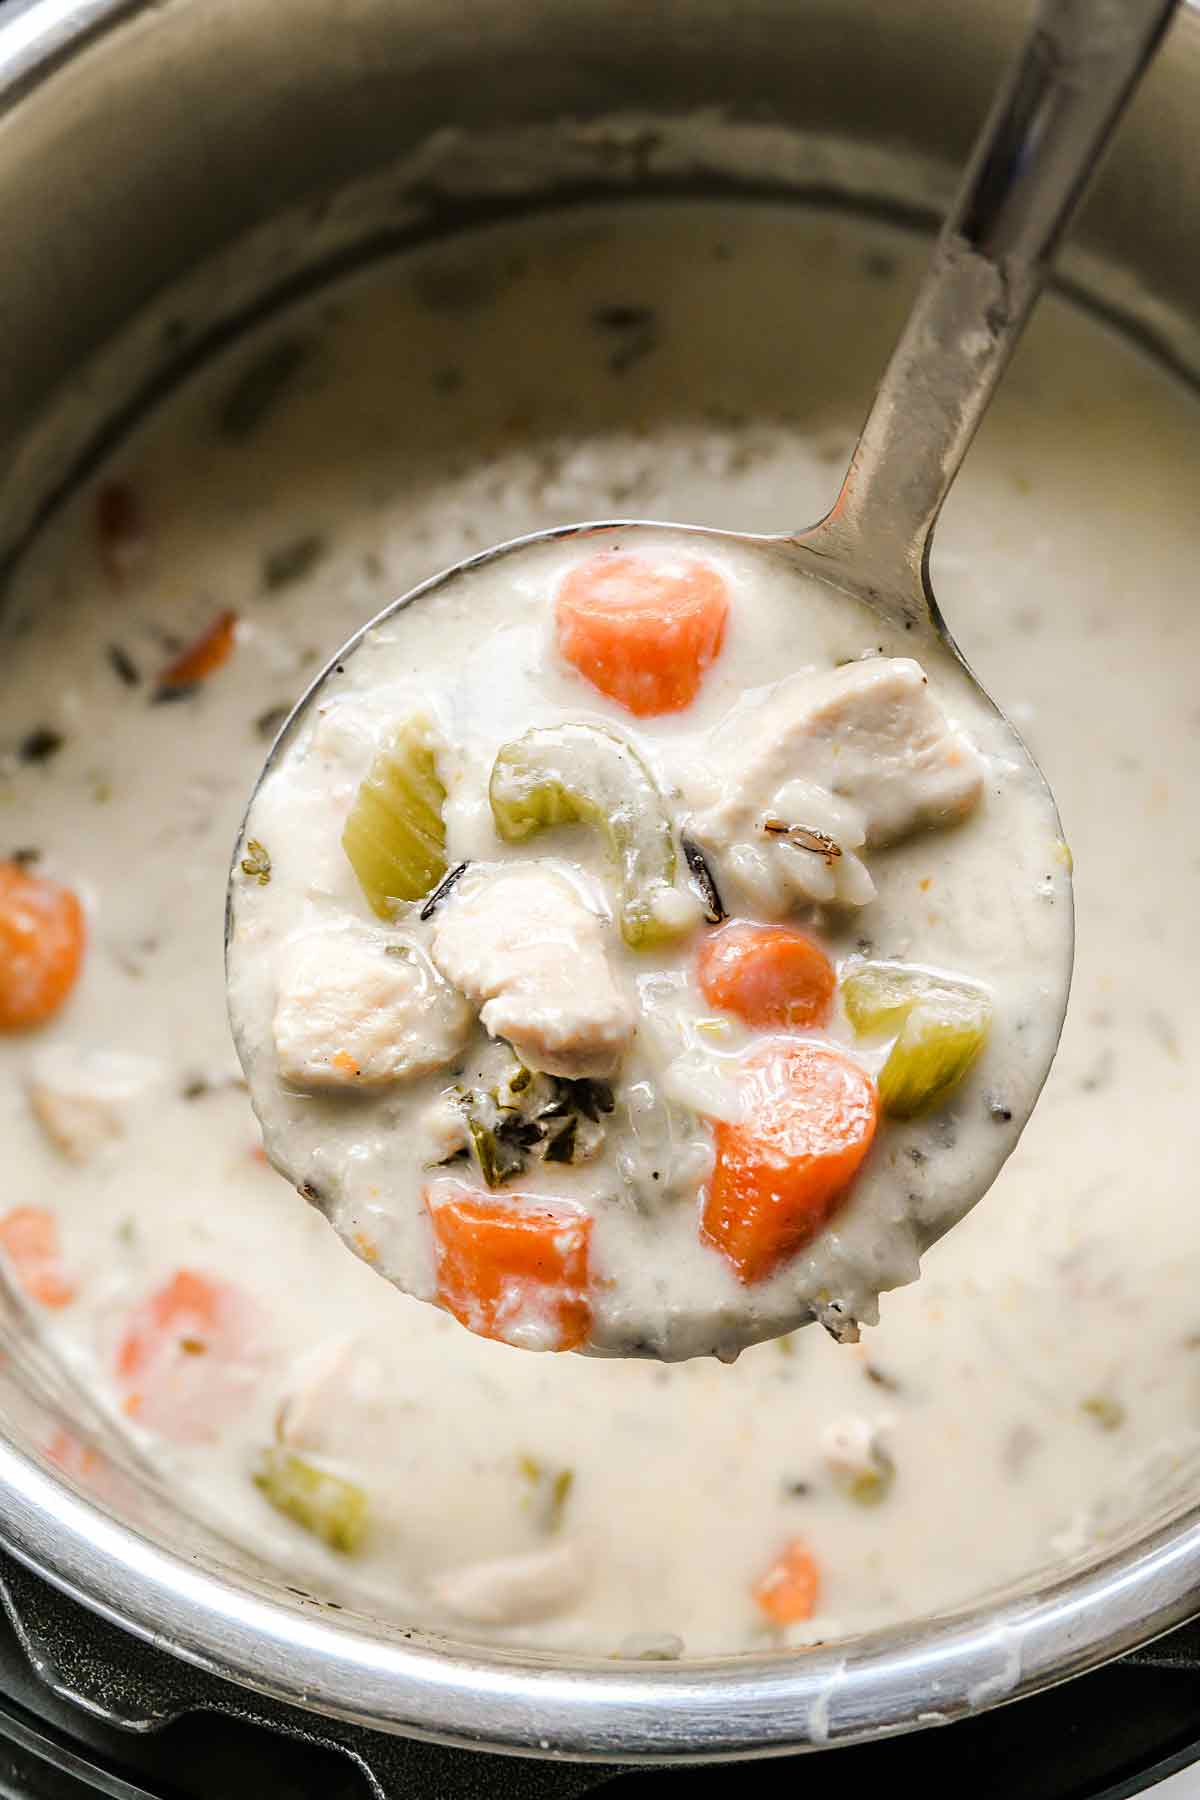 Best Instant Pot Creamy Chicken and Wild Rice Soup Recipe - How to